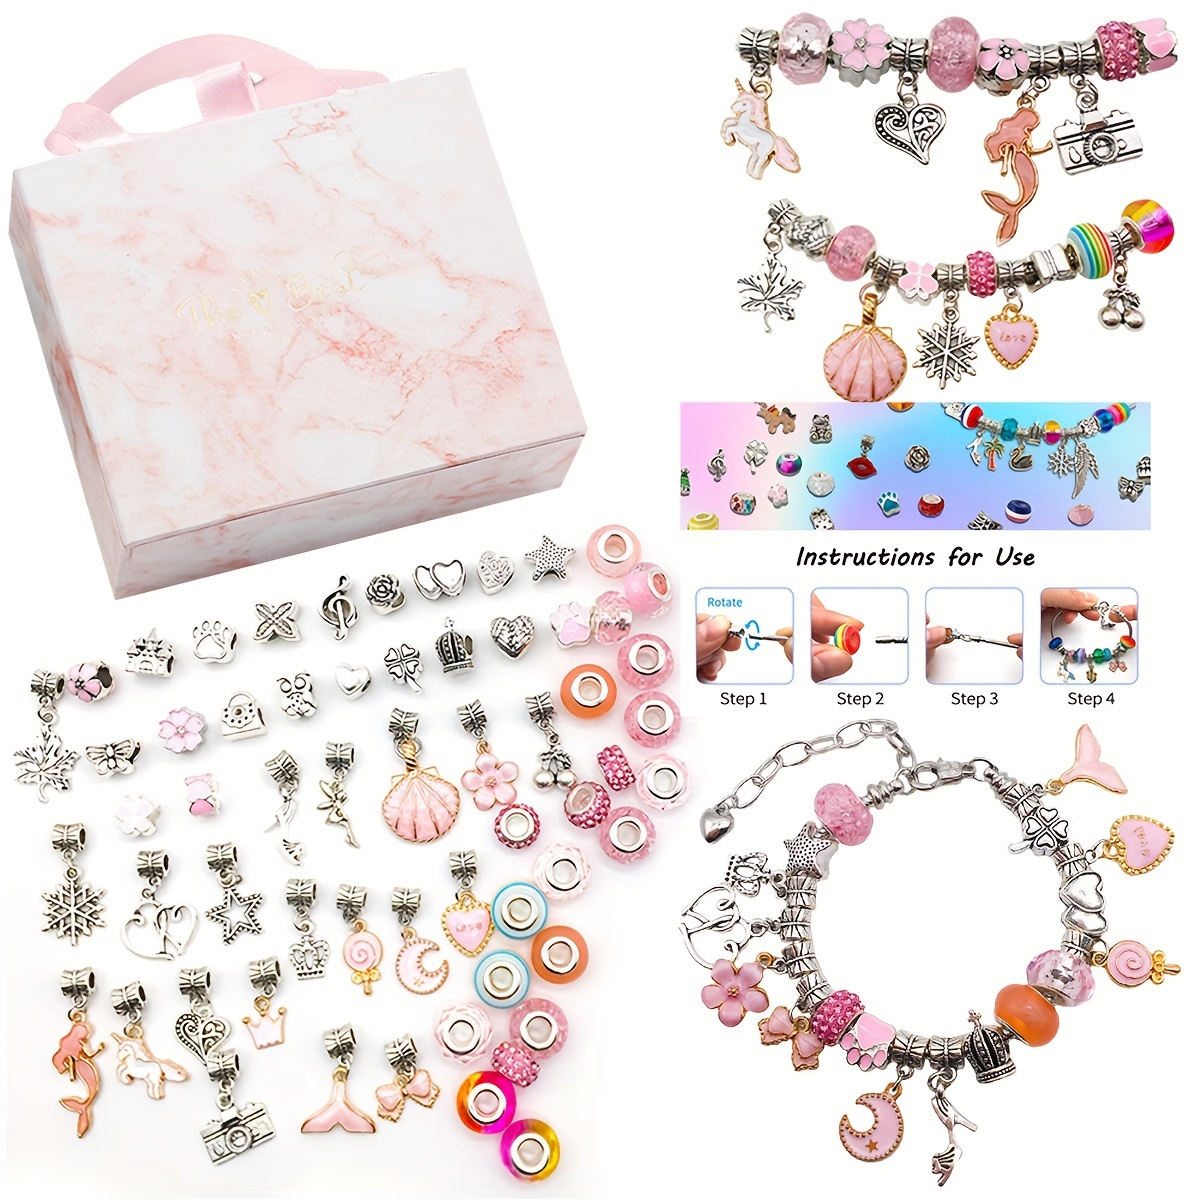 Jewelry Gift for Teen Girls, 85pcs Charm Bracelets Kit With Beads